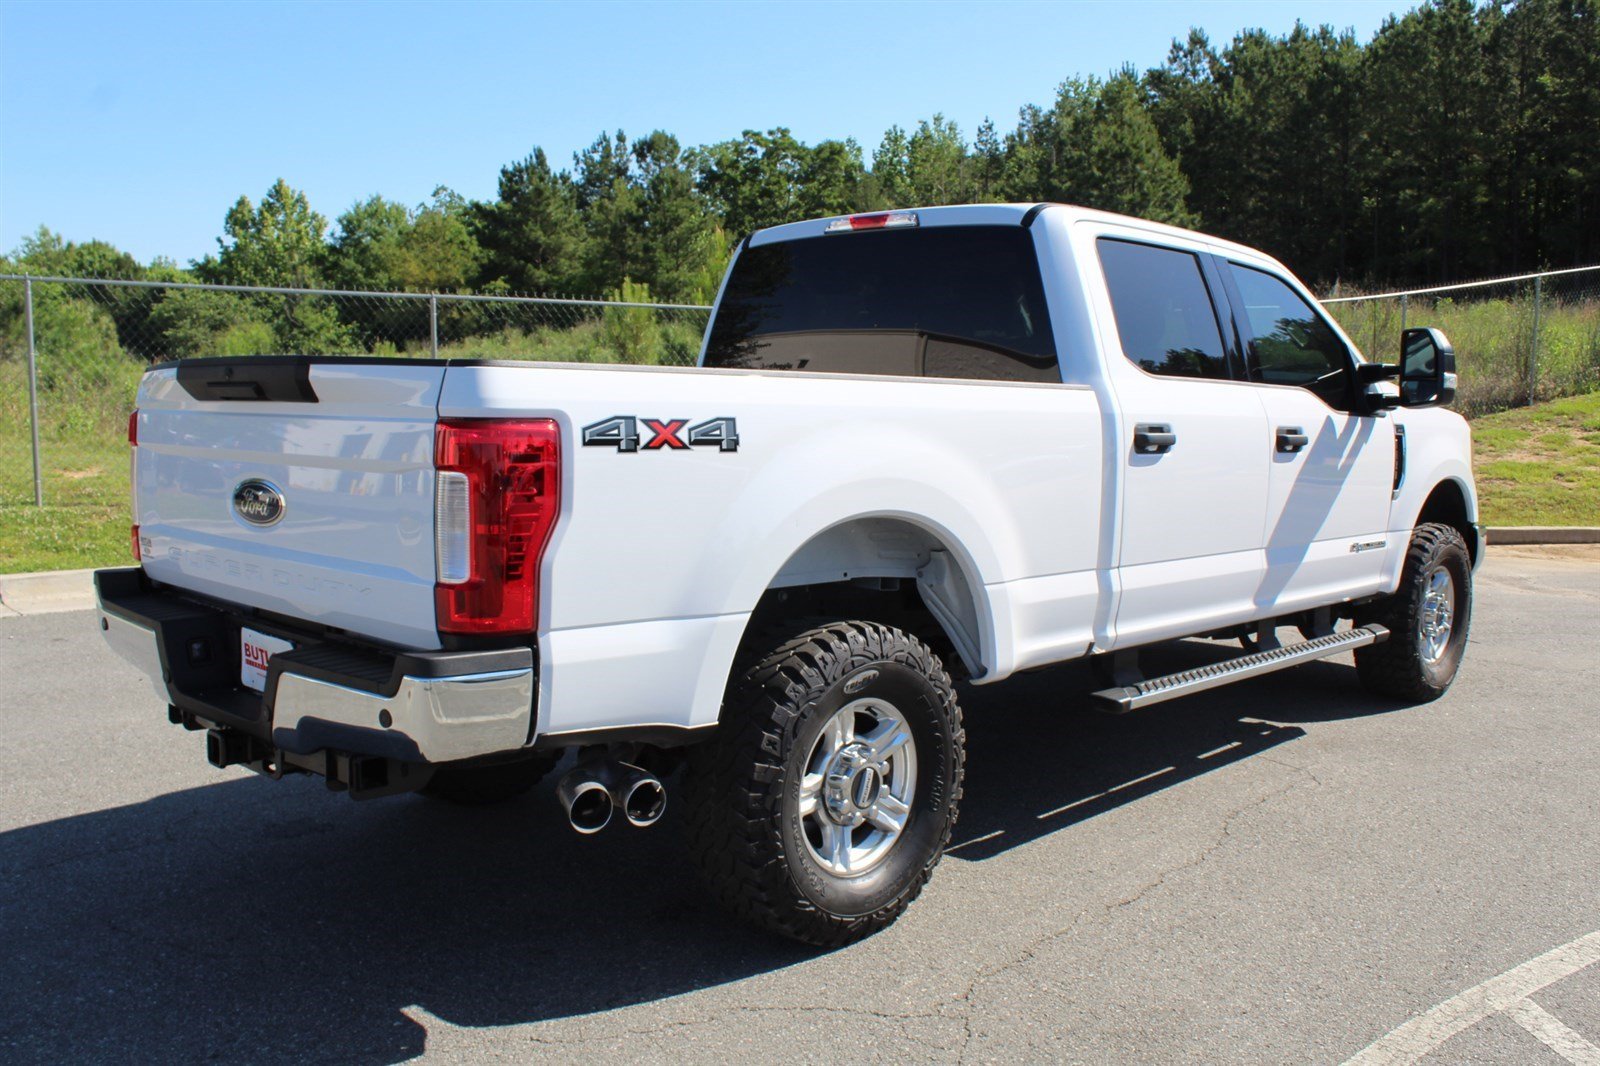 PreOwned 2017 Ford Super Duty F250 SRW XLT Crew Cab Pickup in